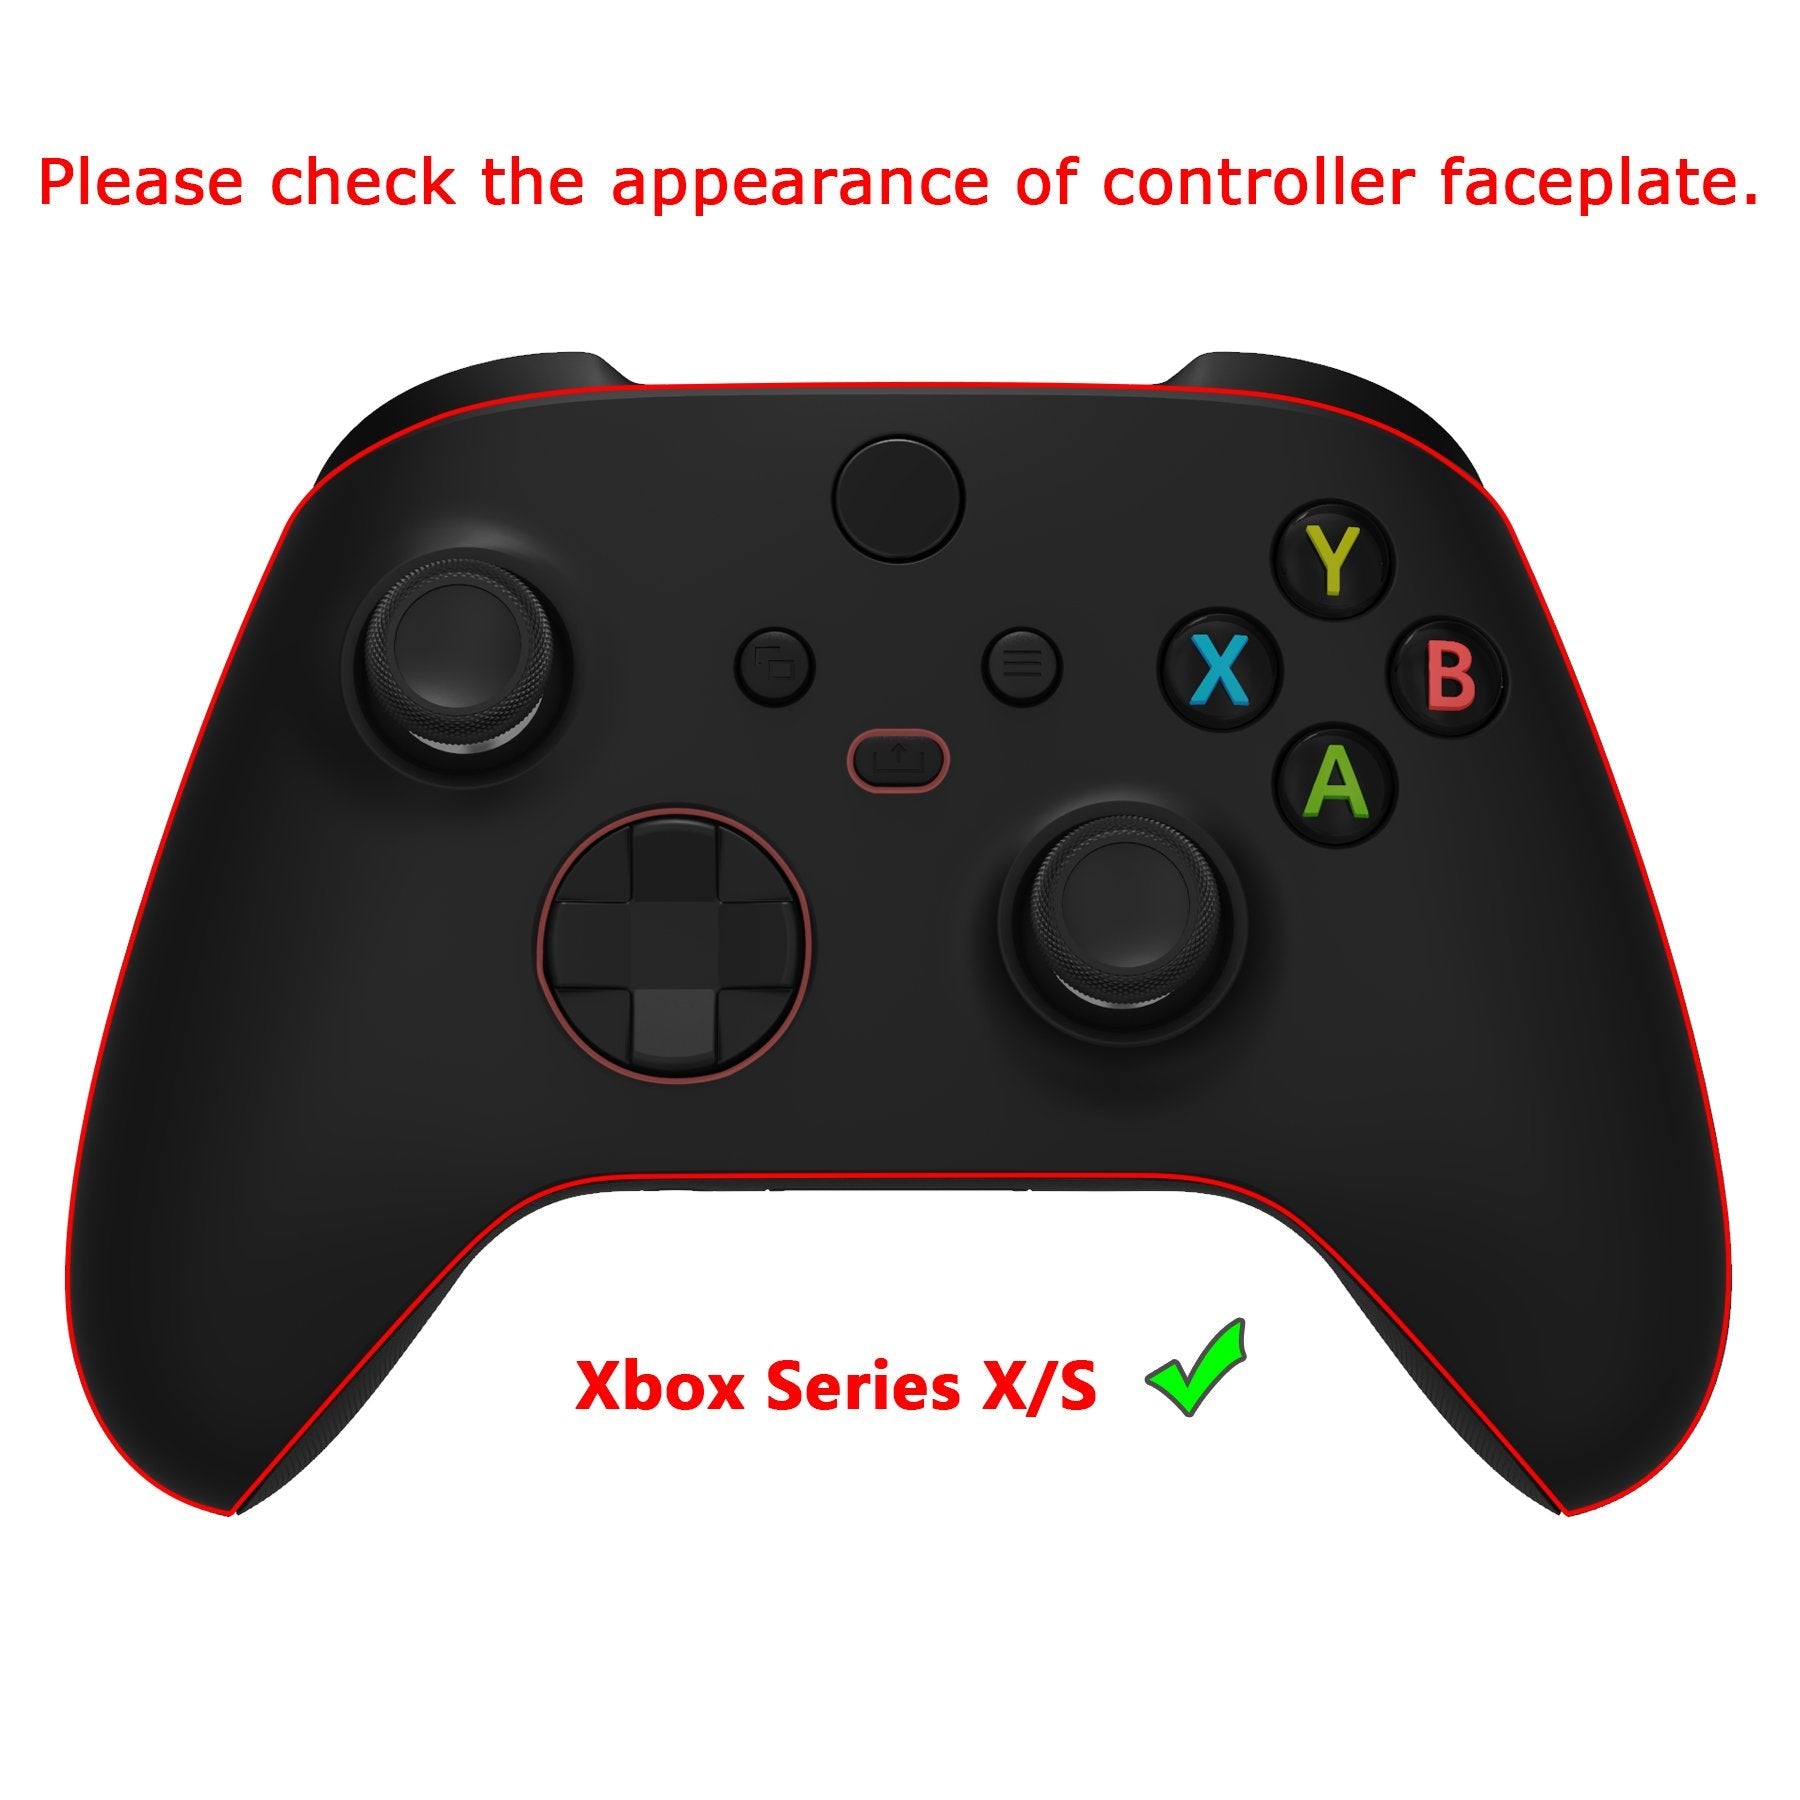 PlayVital Samurai Edition Passion Red Anti-slip Controller Grip Silicone Skin, Ergonomic Soft Rubber Protective Case Cover for Xbox Series S/X Controller with Black Thumb Stick Caps - WAX3014 PlayVital